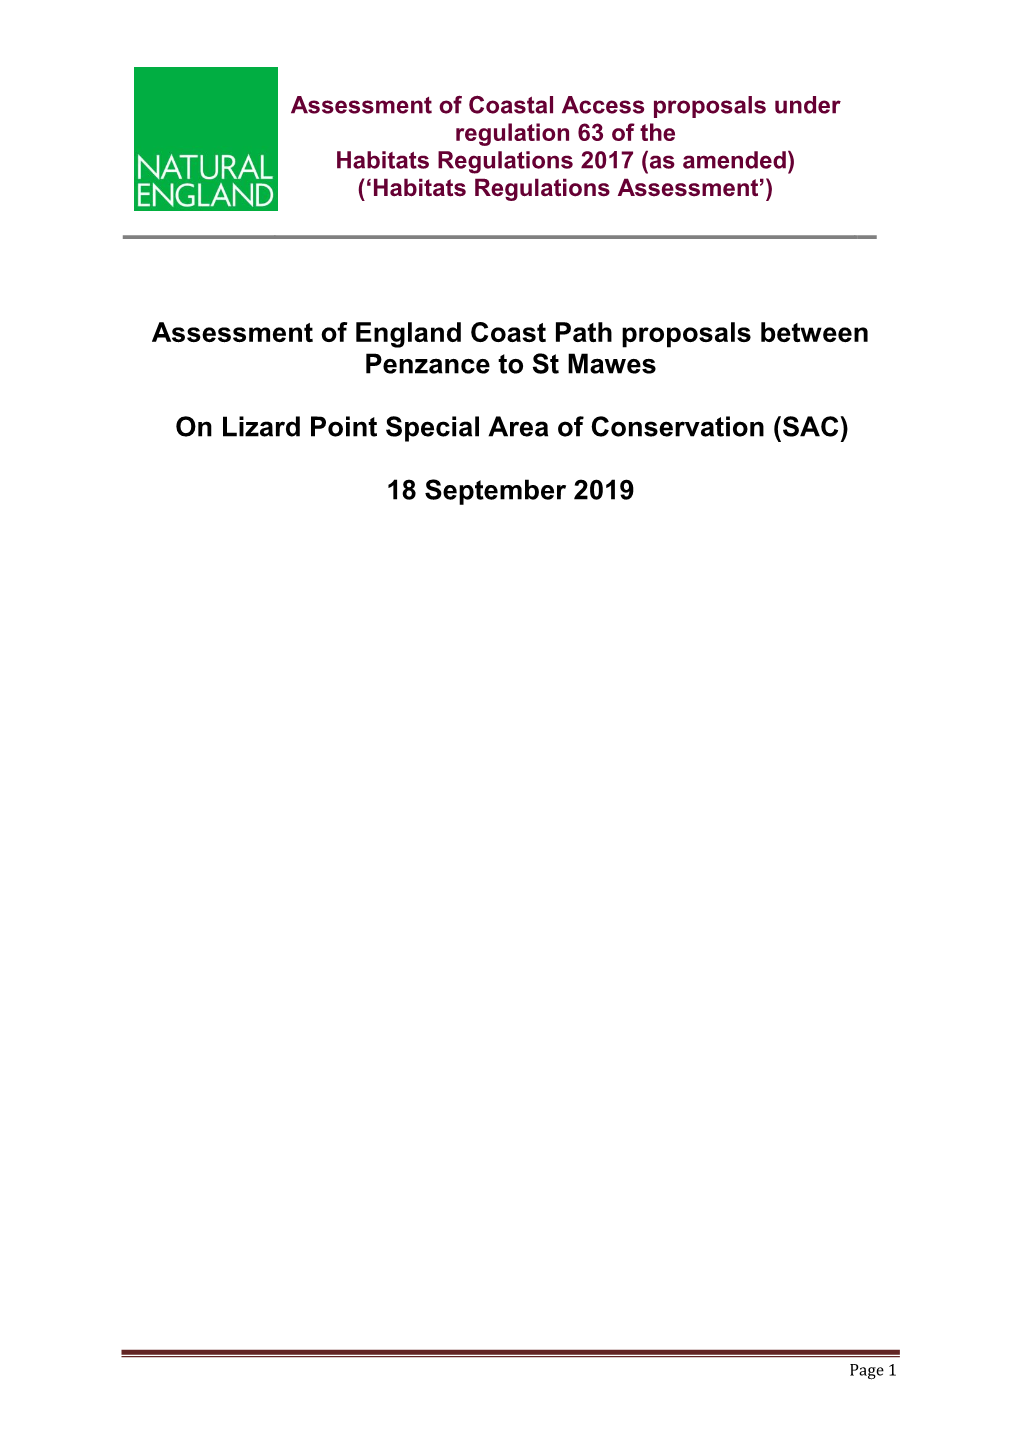 Assessment of England Coast Path Proposals Between Penzance to St Mawes on Lizard Point Special Area of Conservation (SAC) 18 Se